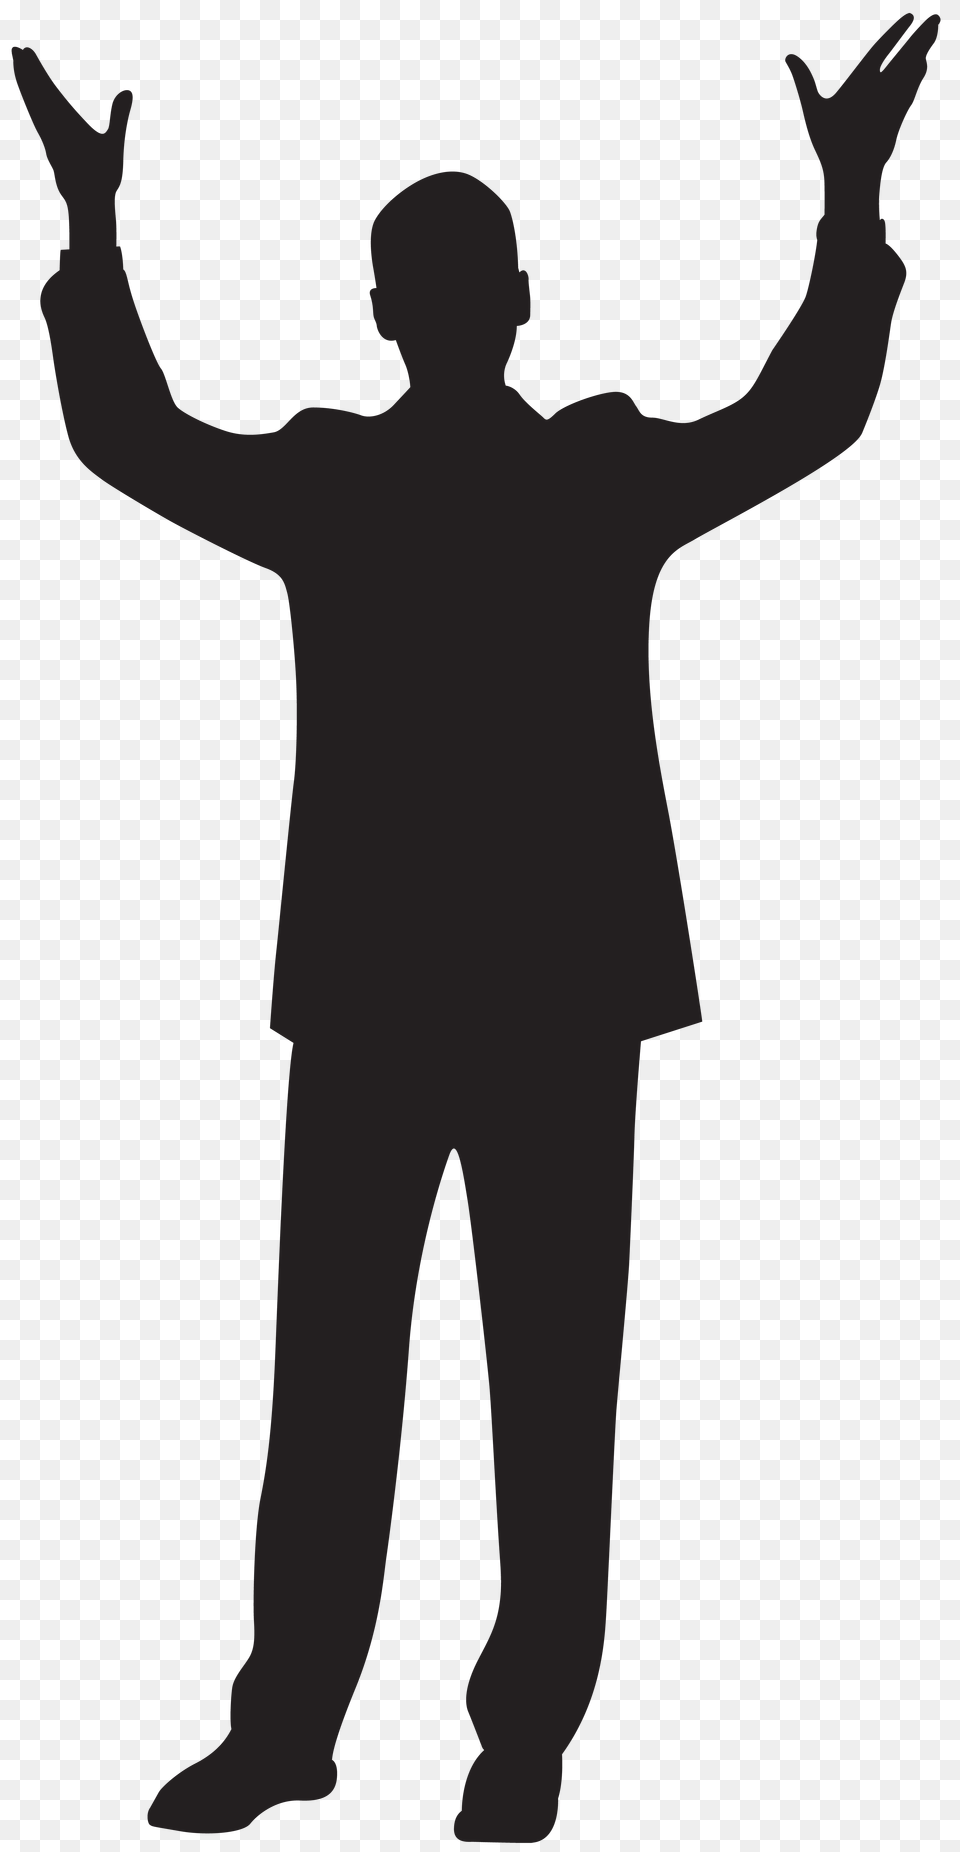 Man With Hands Up Silhouette Clip Art Gallery, Cross, Symbol, Text Free Transparent Png